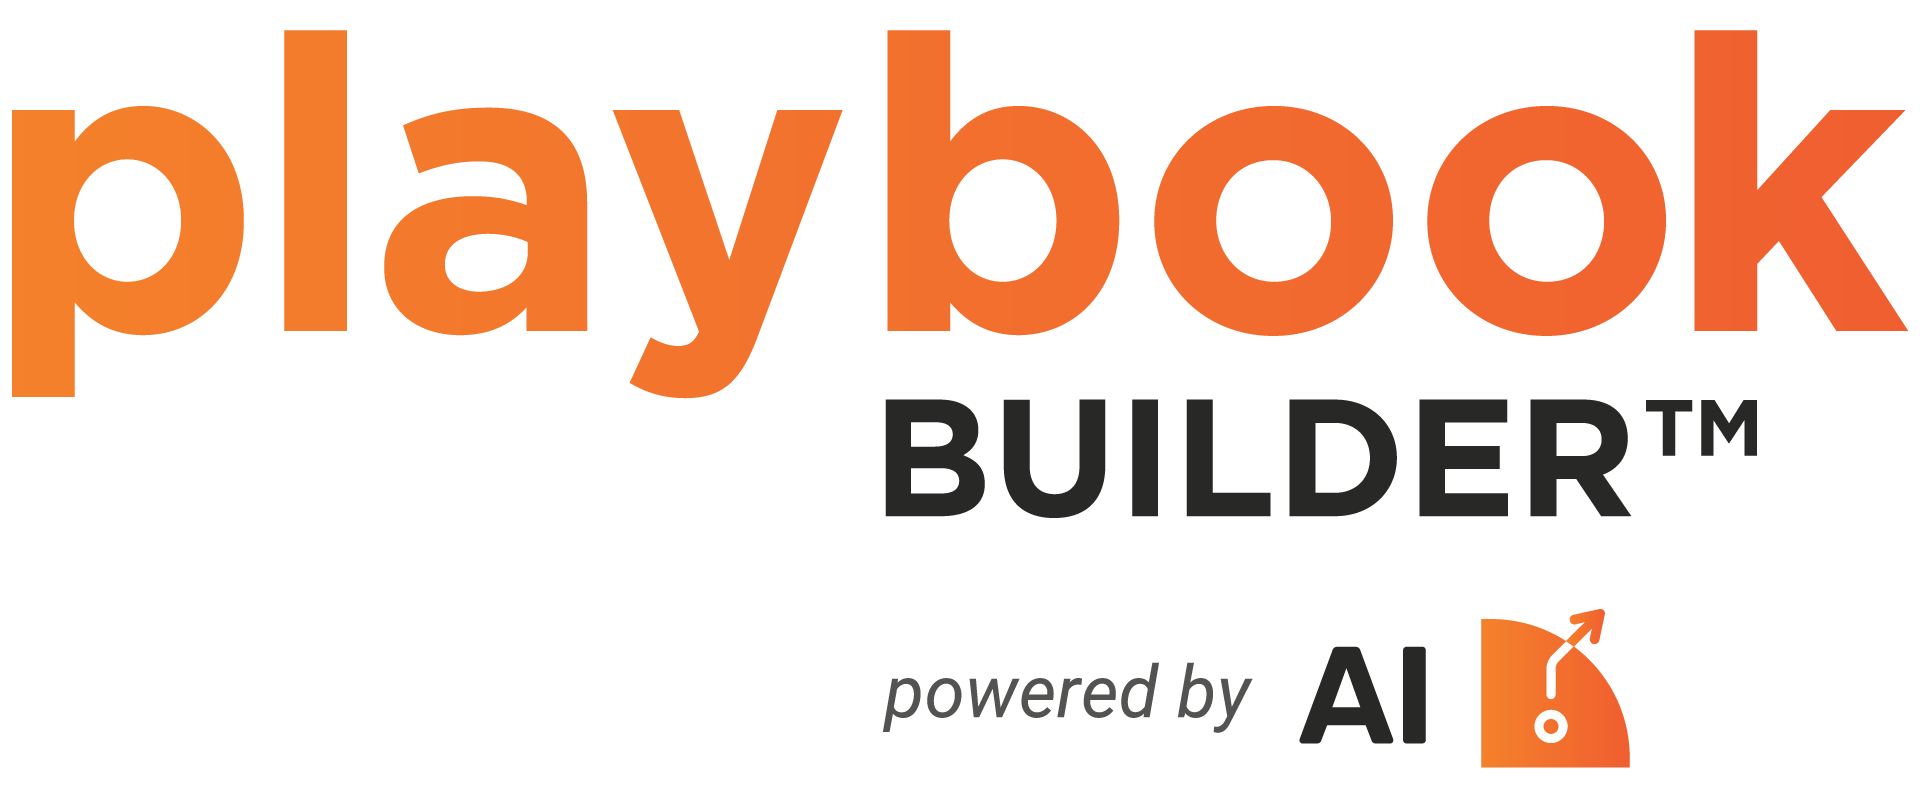 PlayBook Builder Powered by AI